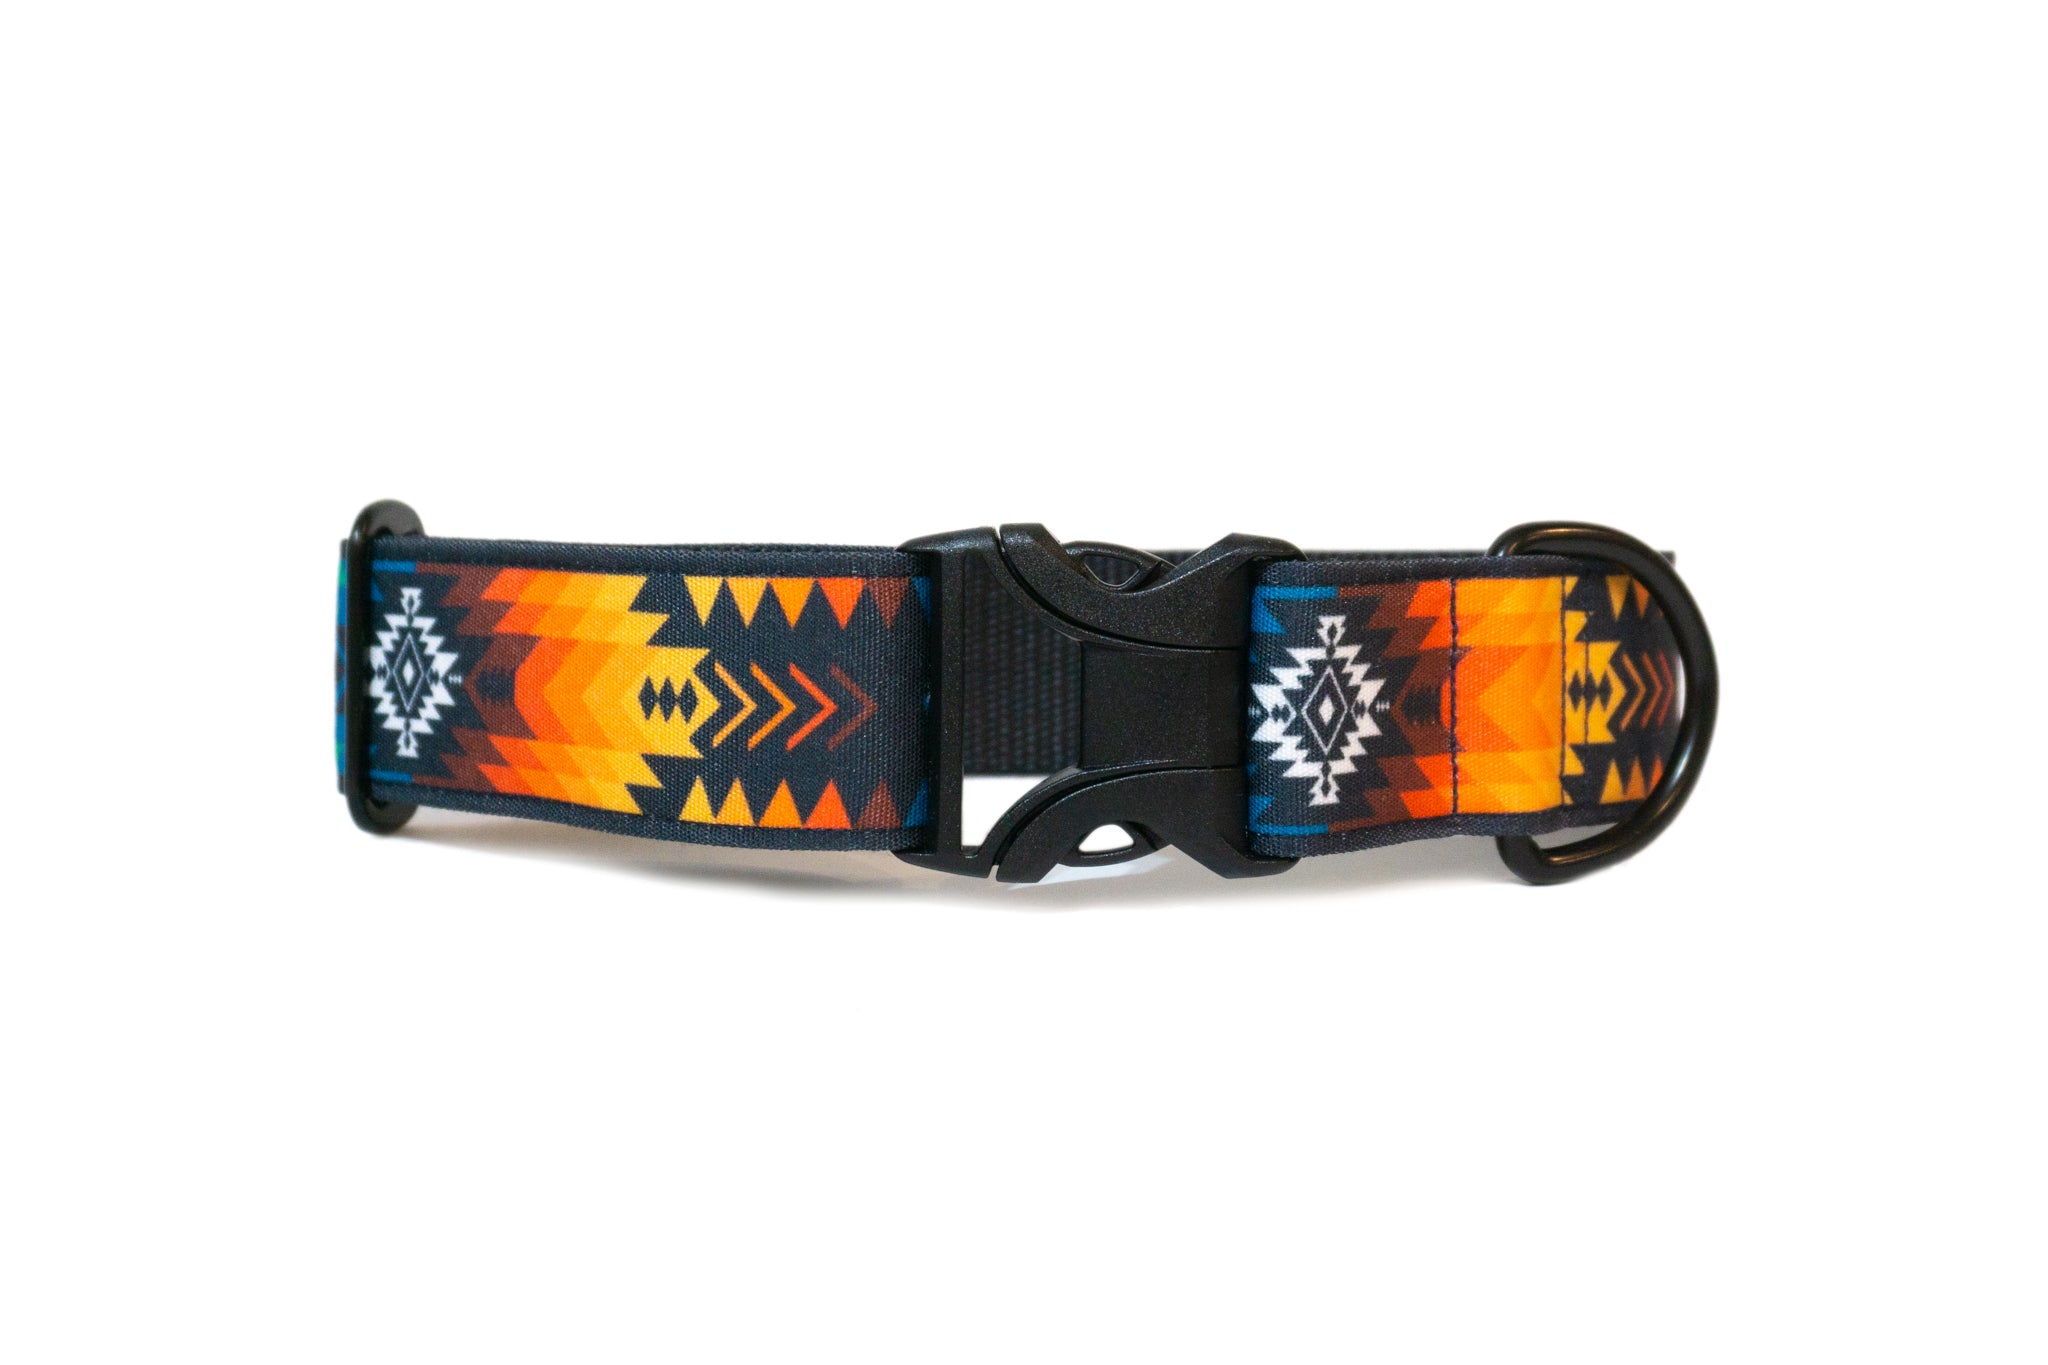  Buckle-Down CALI Yellowith Orange Martingale Dog Collar : Pet  Supplies